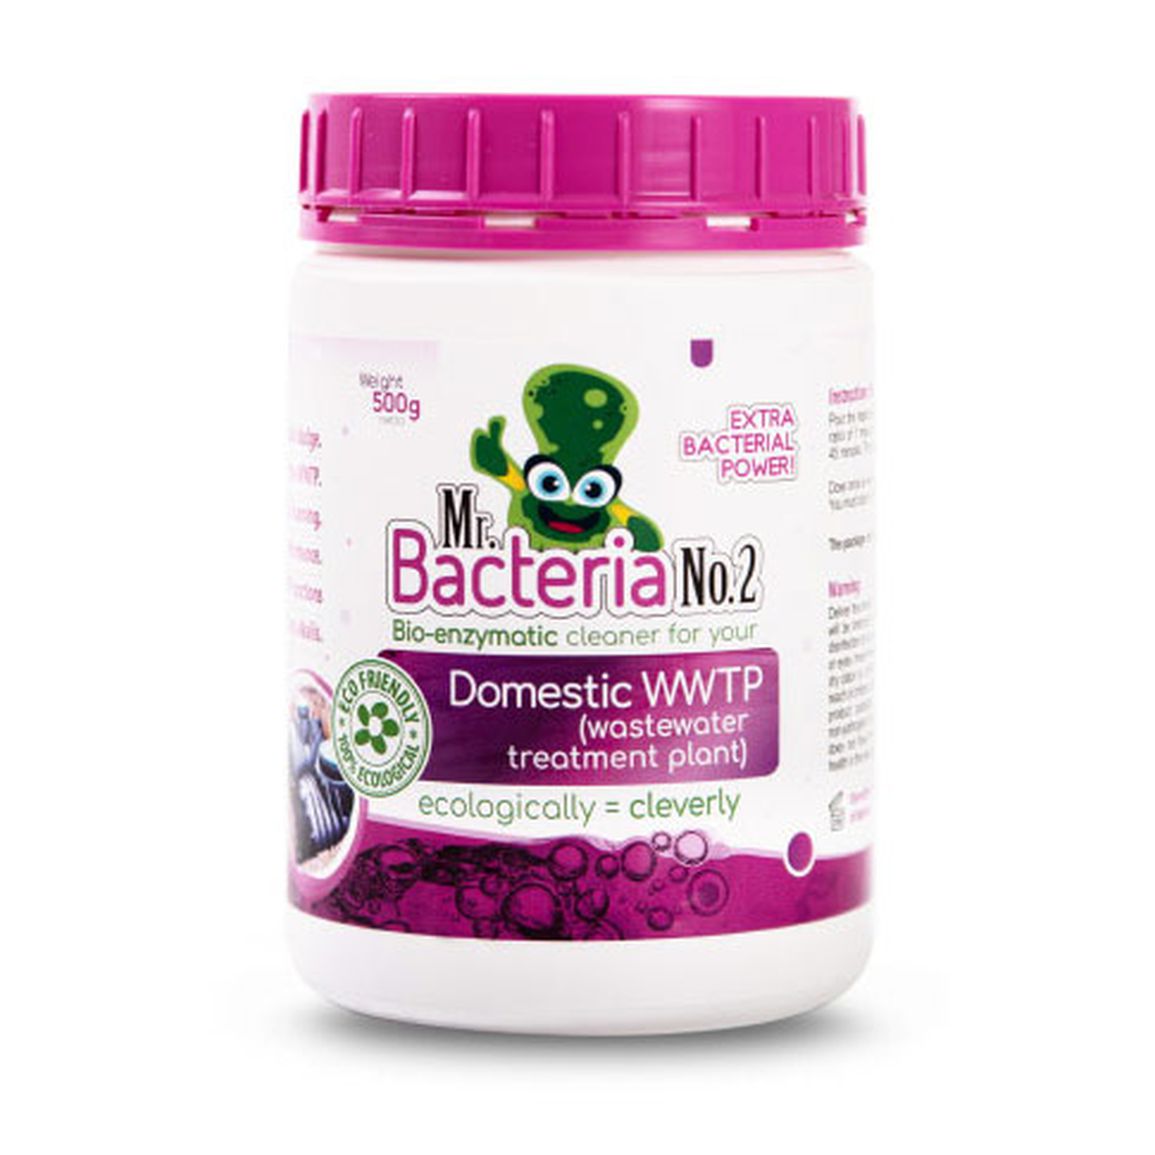 Mr. Bacteria No.2 Bio-enzymatic cleaner for your